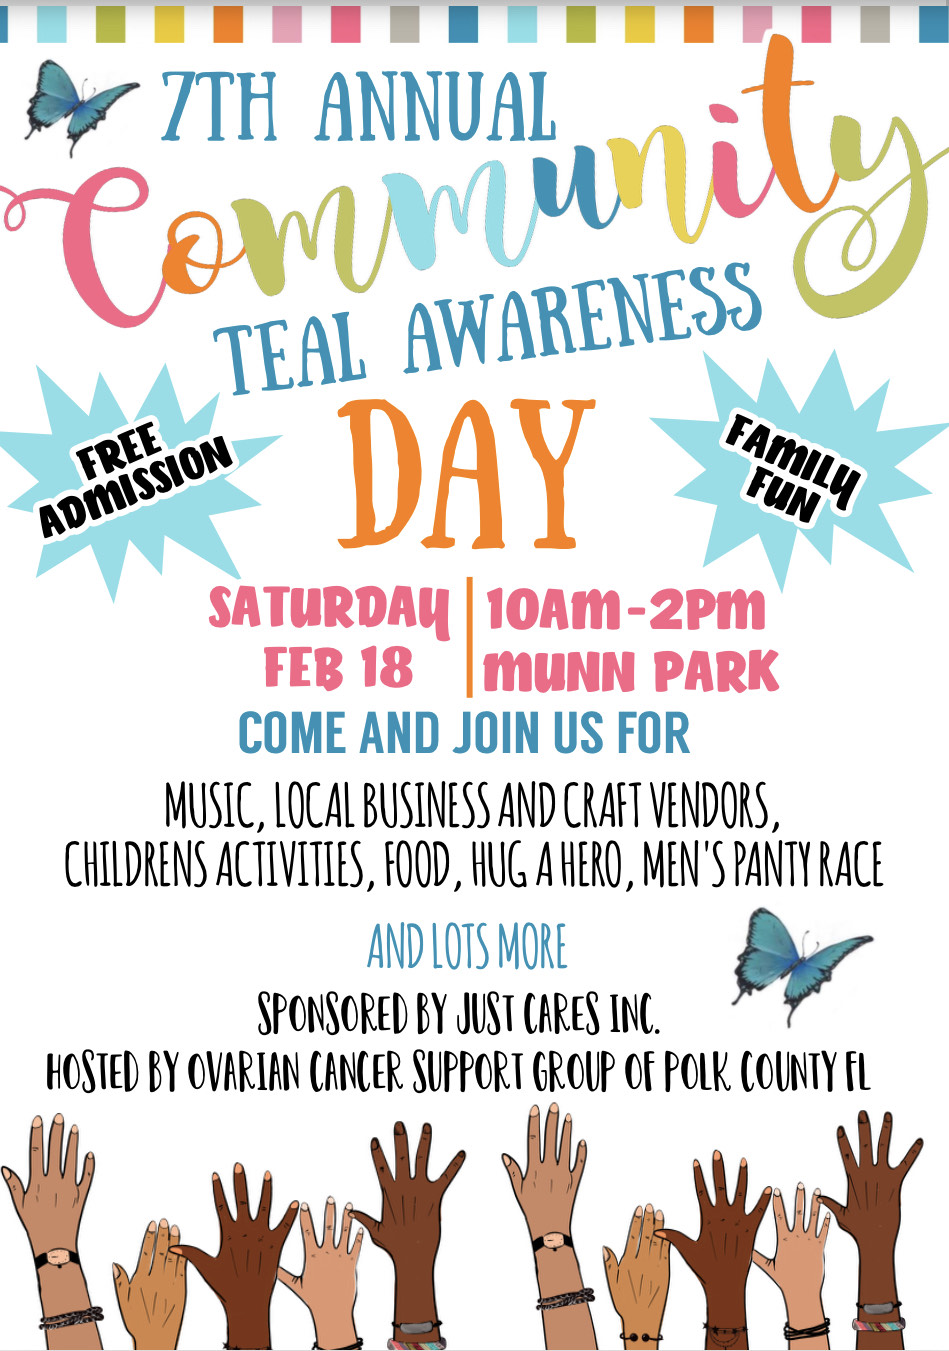 The Ovarian Cancer Support Group of Polk County FL invites you to attend the 7th Annual Community Teal Awareness Day. There will be music, local business and craft vendors, children's activities, food, hug a hero, men's panty race, and more! FREE fun for the entire family!